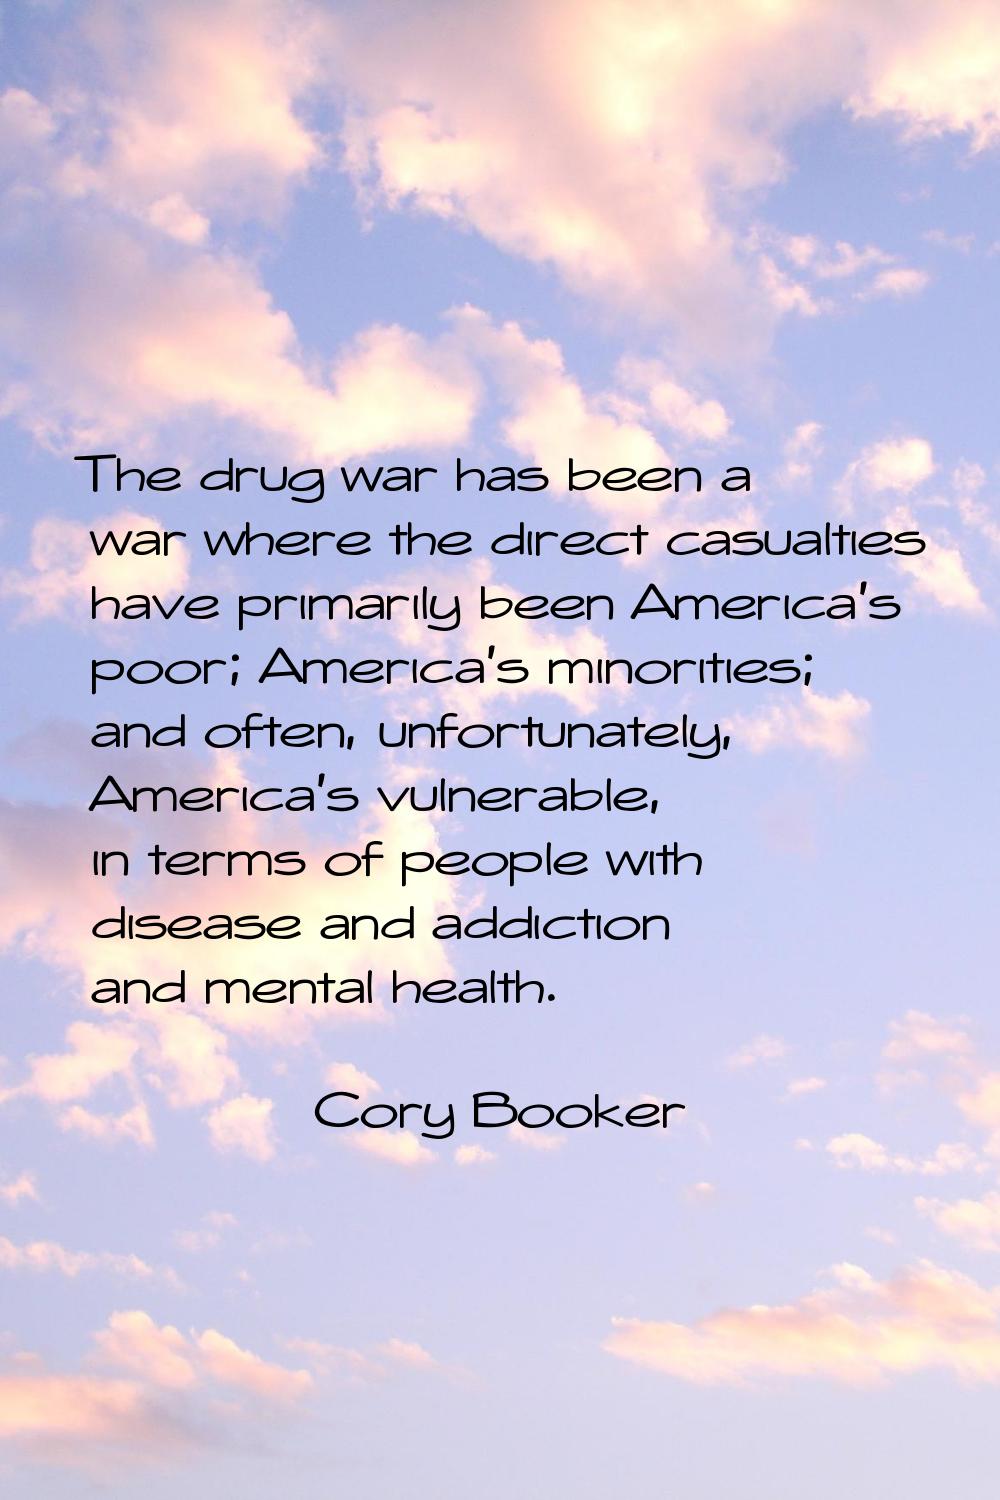 The drug war has been a war where the direct casualties have primarily been America's poor; America